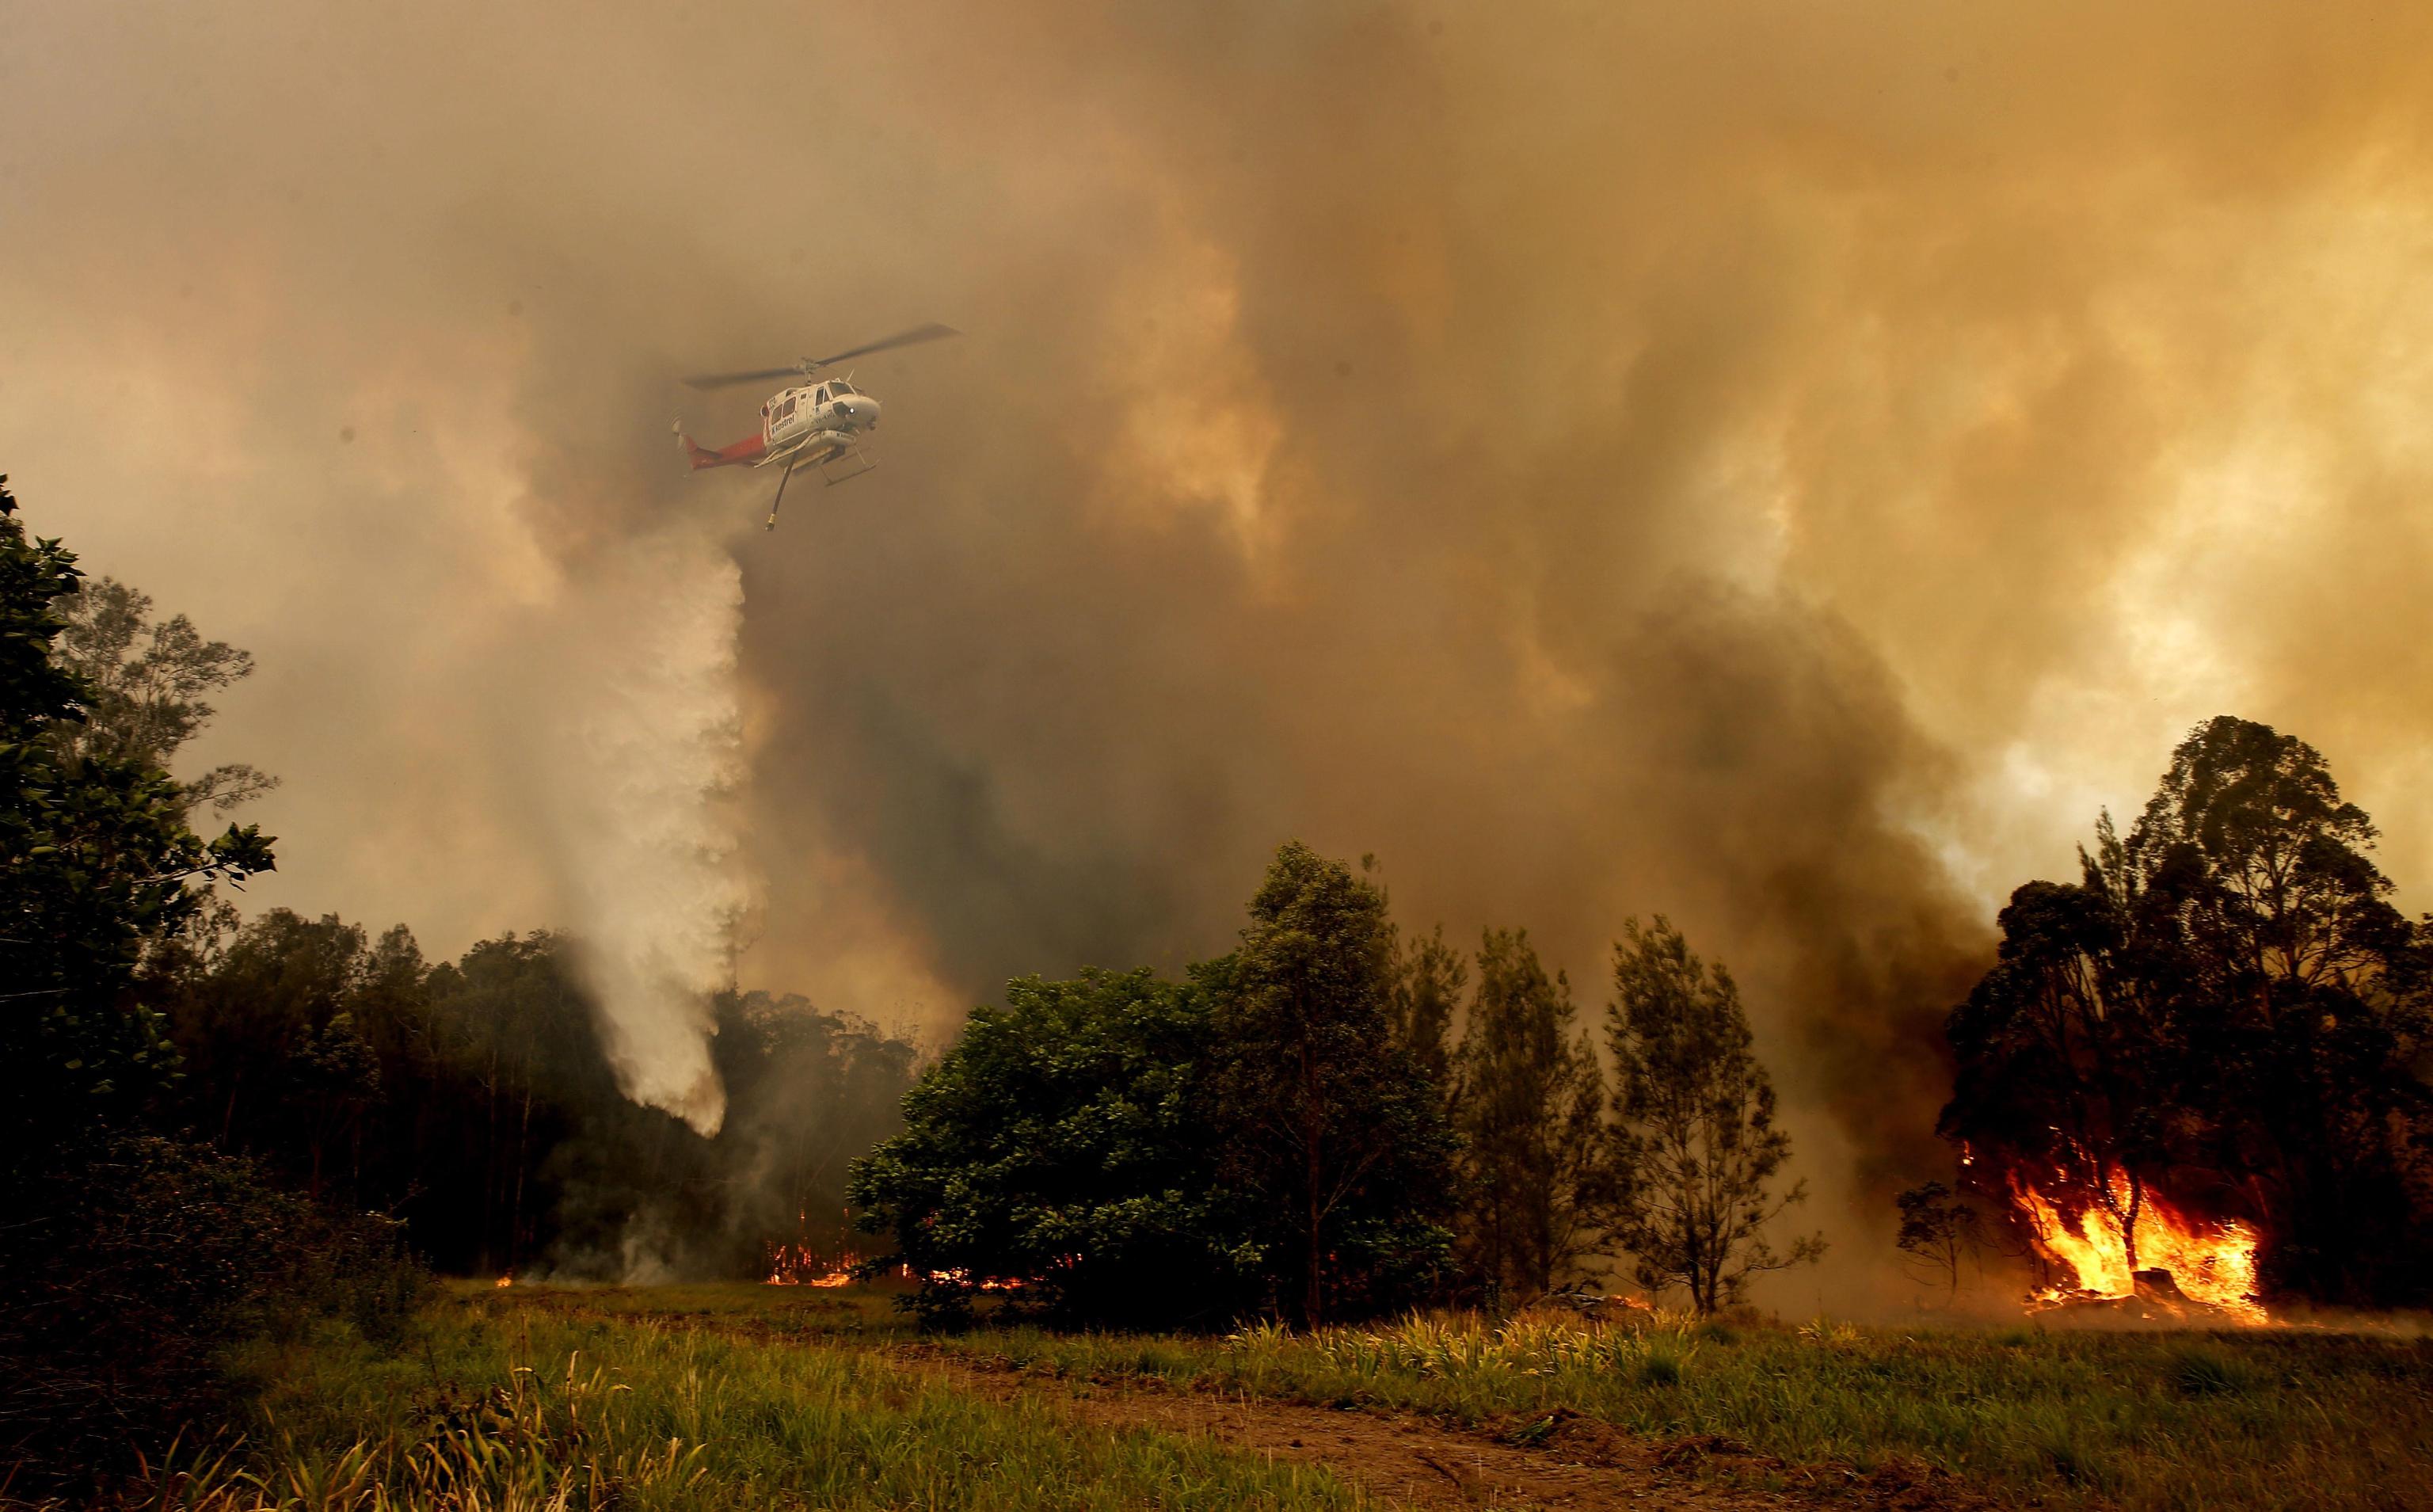 epa07982442 A fire bombing helitanker works to contain a bushfire along Old Bar road in Old Bar, New South Wales, Australia, 09 November 2019. Two people have been killed and seven others are msising due to bushfires in New South Wales, which have also destroyed at least 100 homes.  EPA/DARREN PATEMAN AUSTRALIA AND NEW ZEALAND OUT